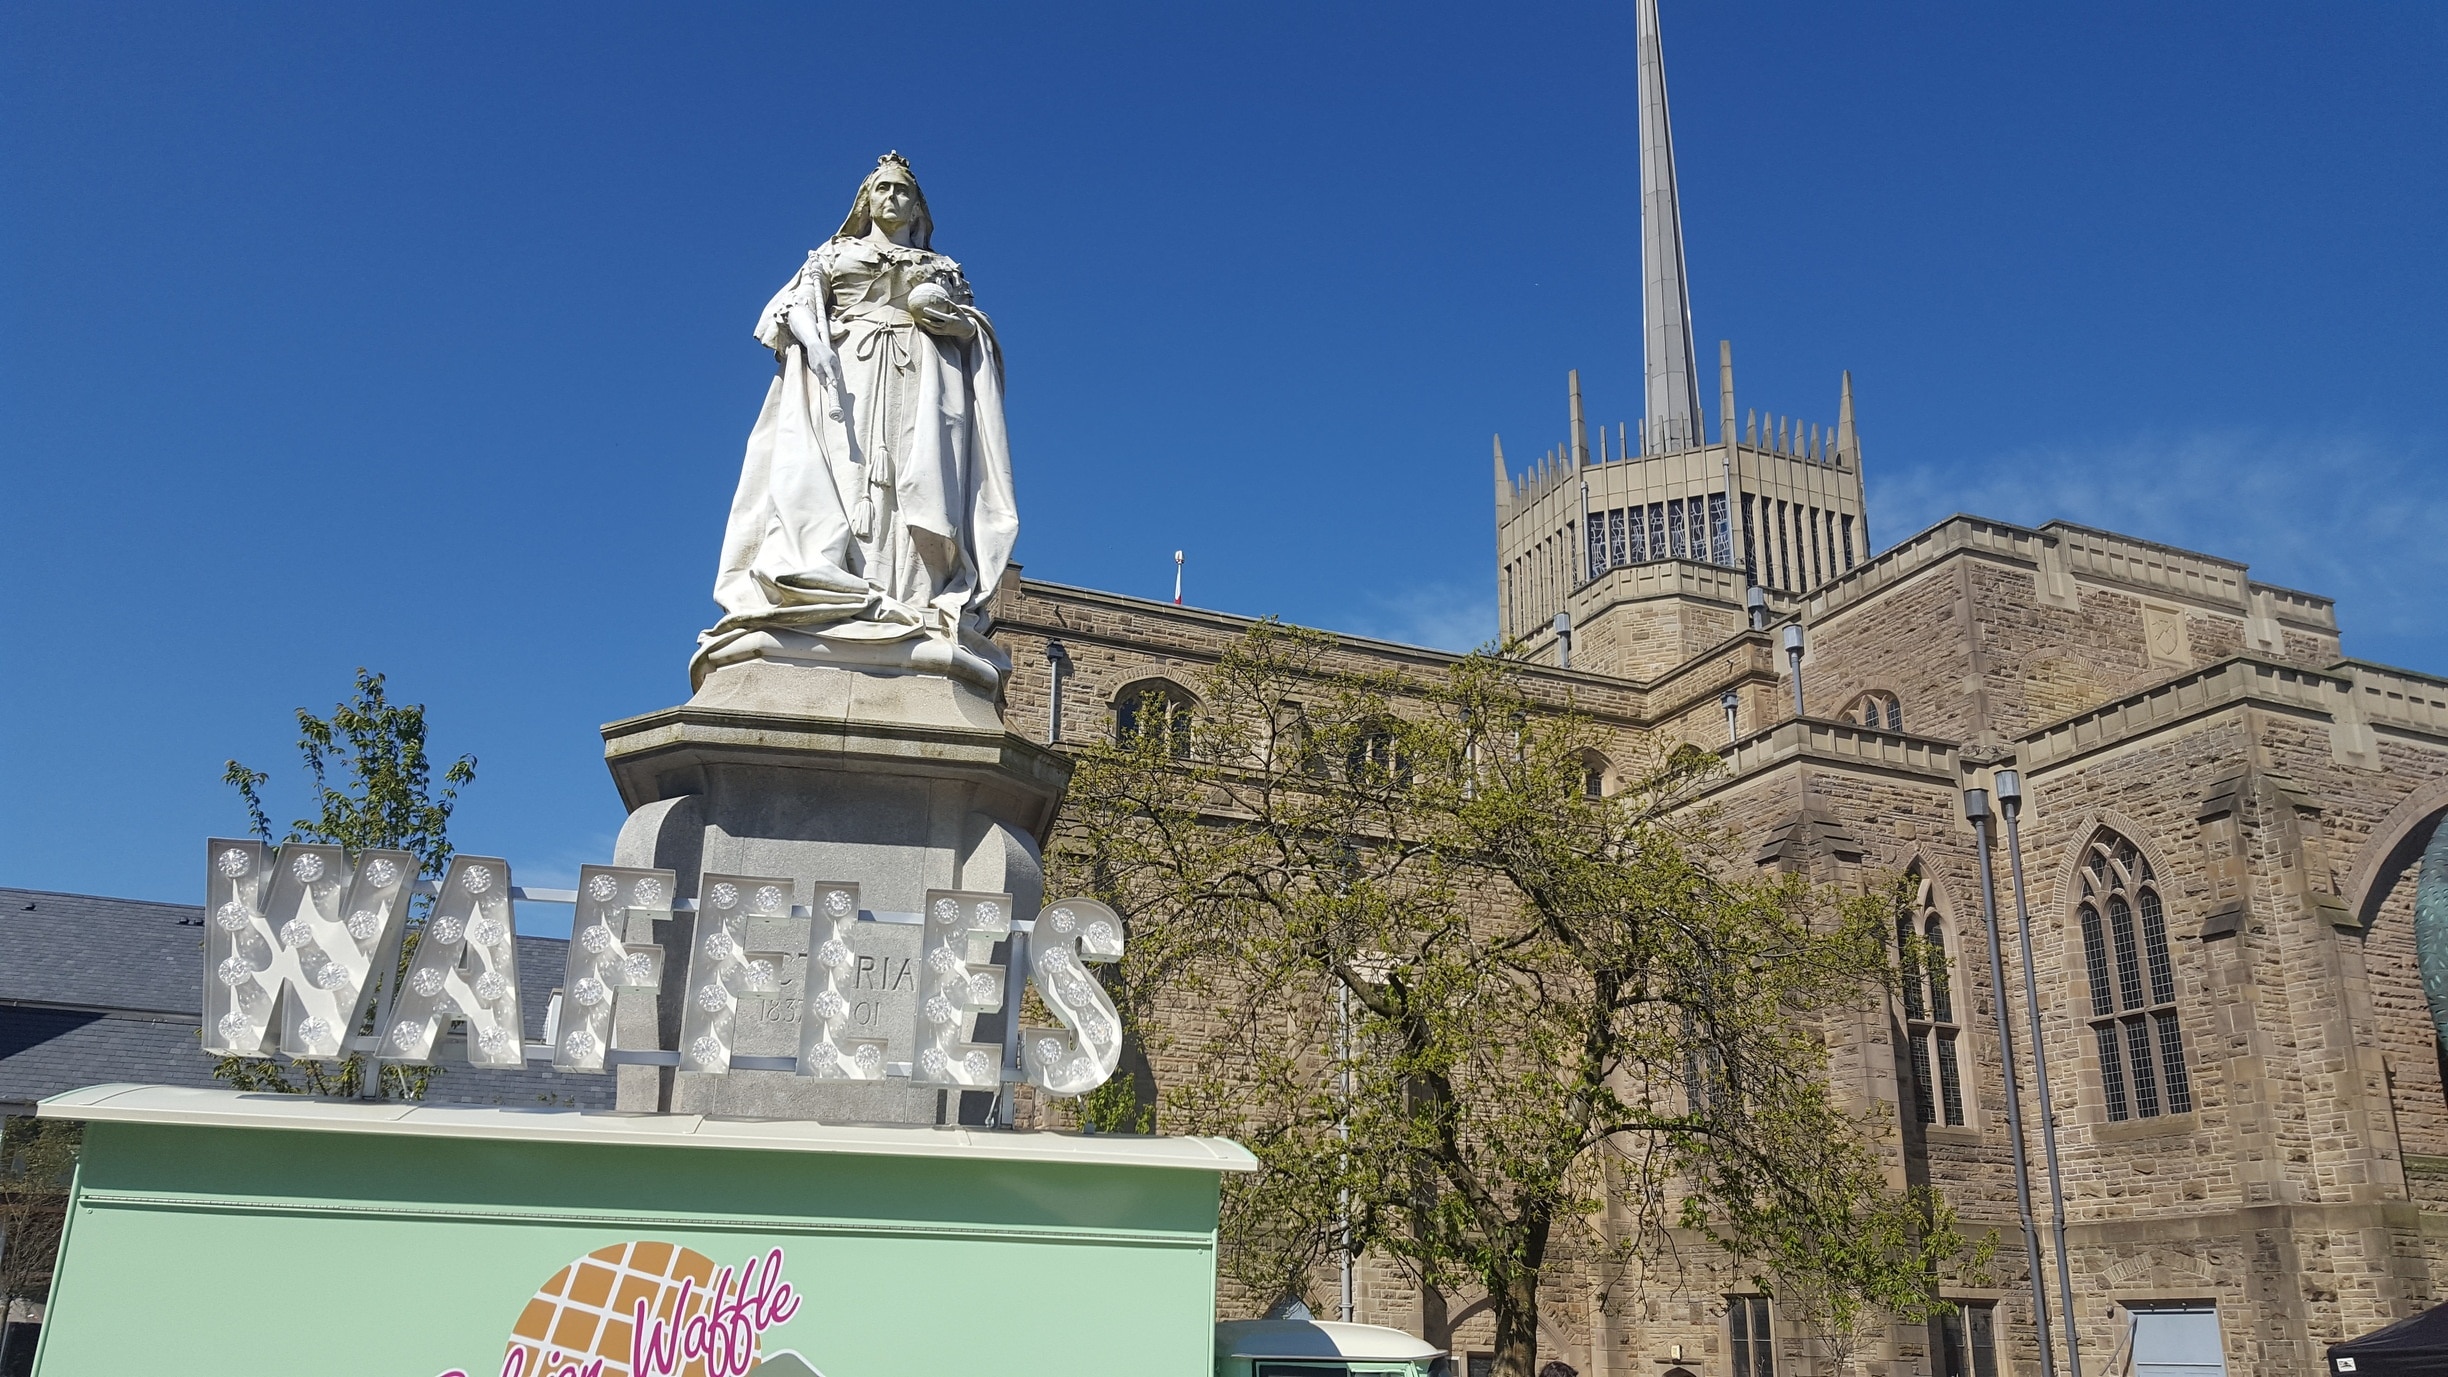 The Sky was blue today in Blackburn and Queen Vic was keen for a waffle. : ) 